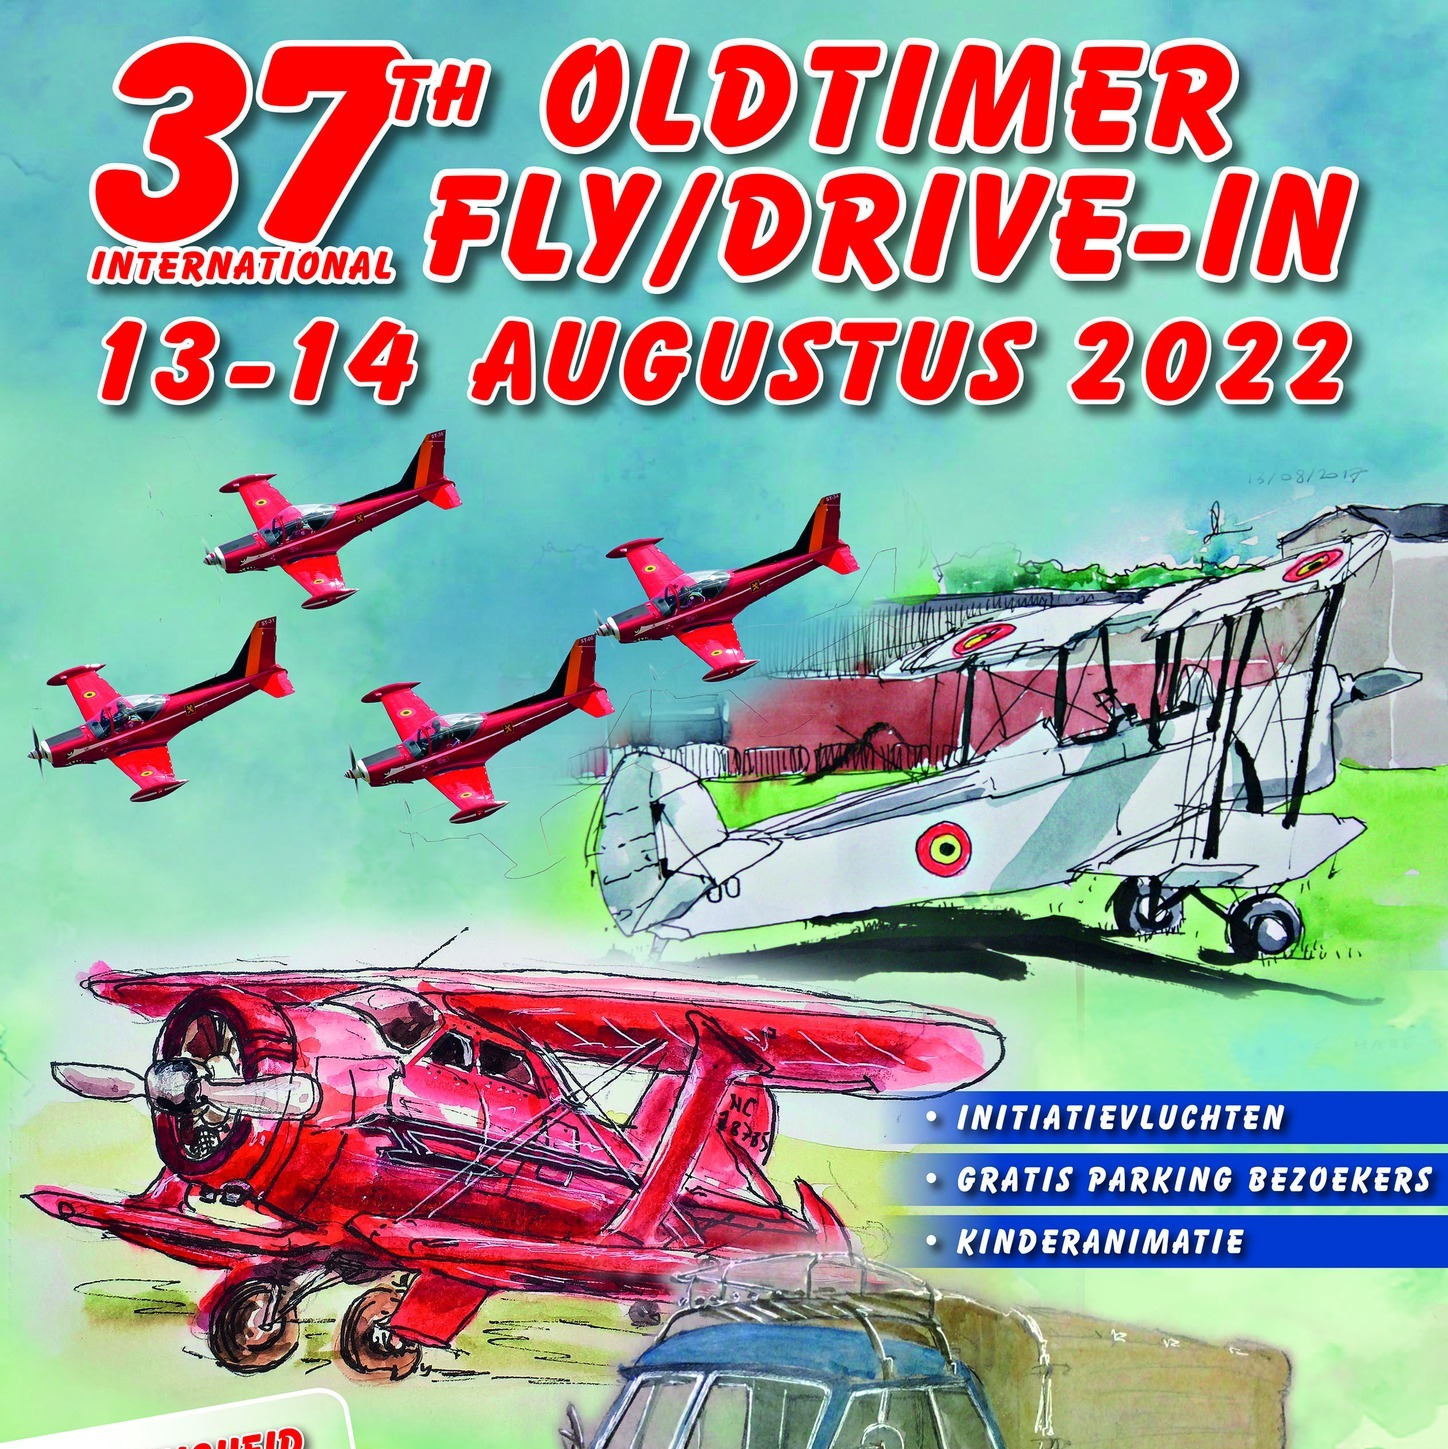 affiche de37th Oldtimer Fly & Drive In